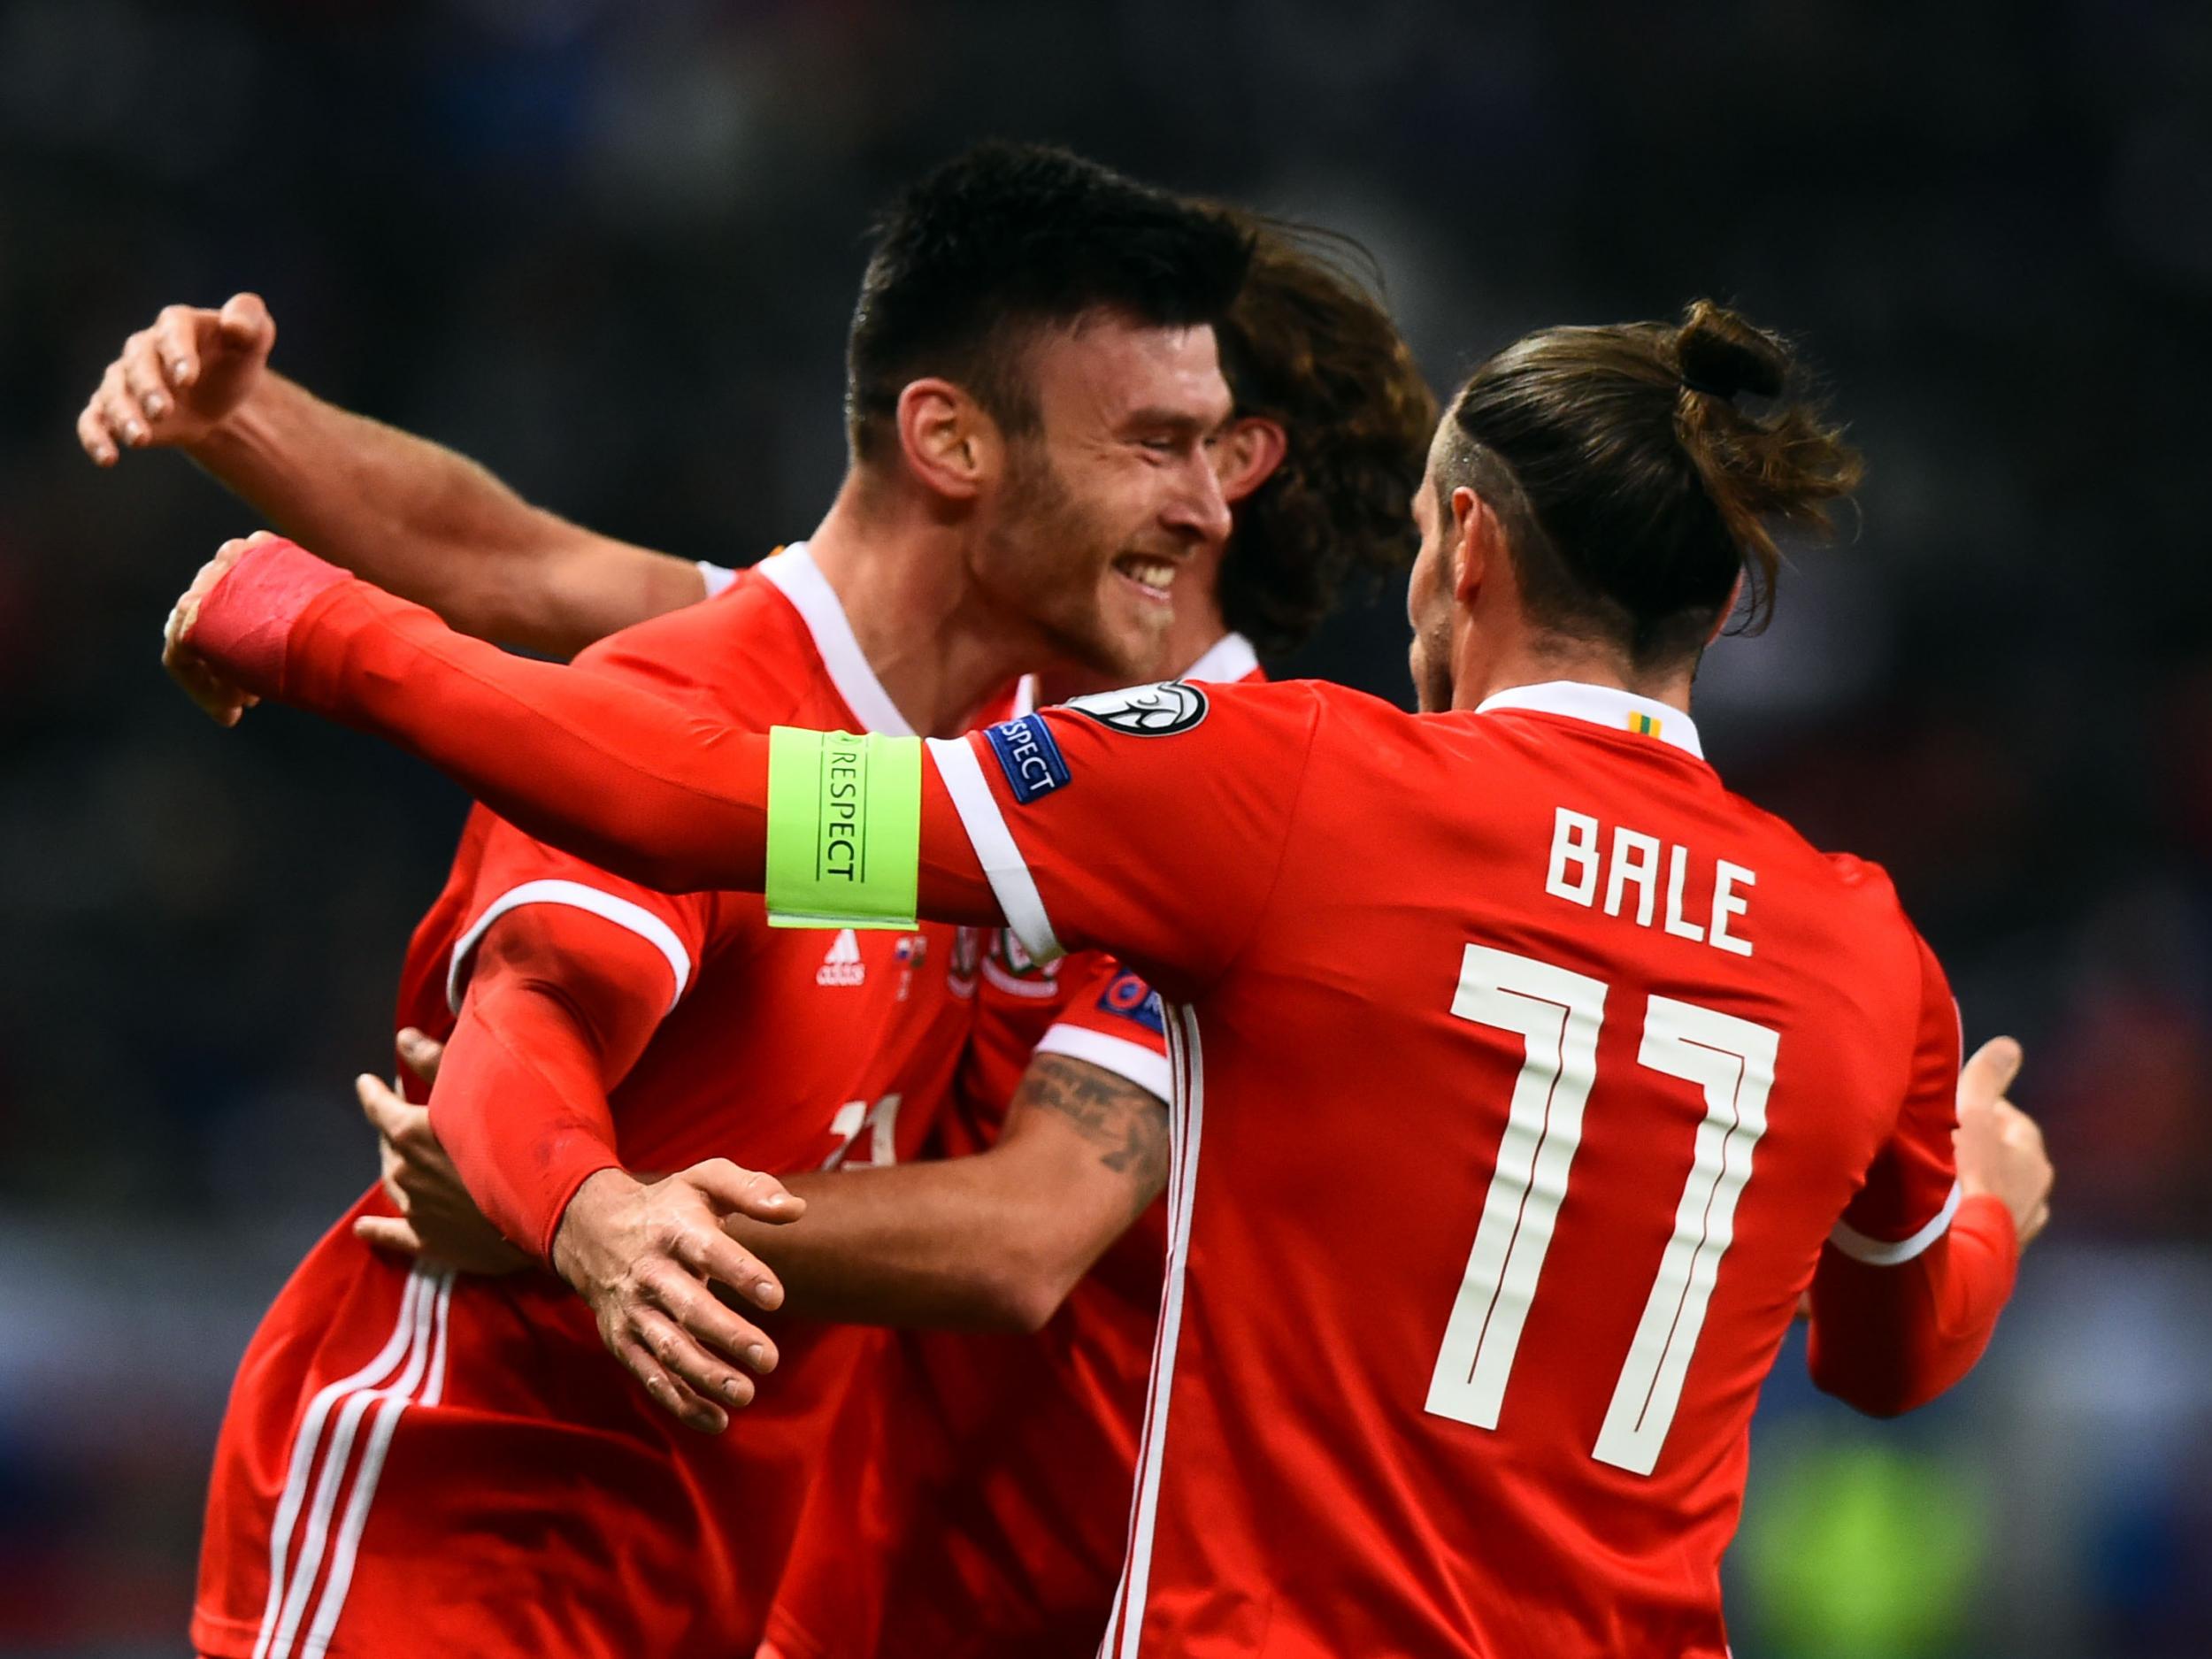 Wales kept their hopes alive with a 1-1 draw in Slovakia